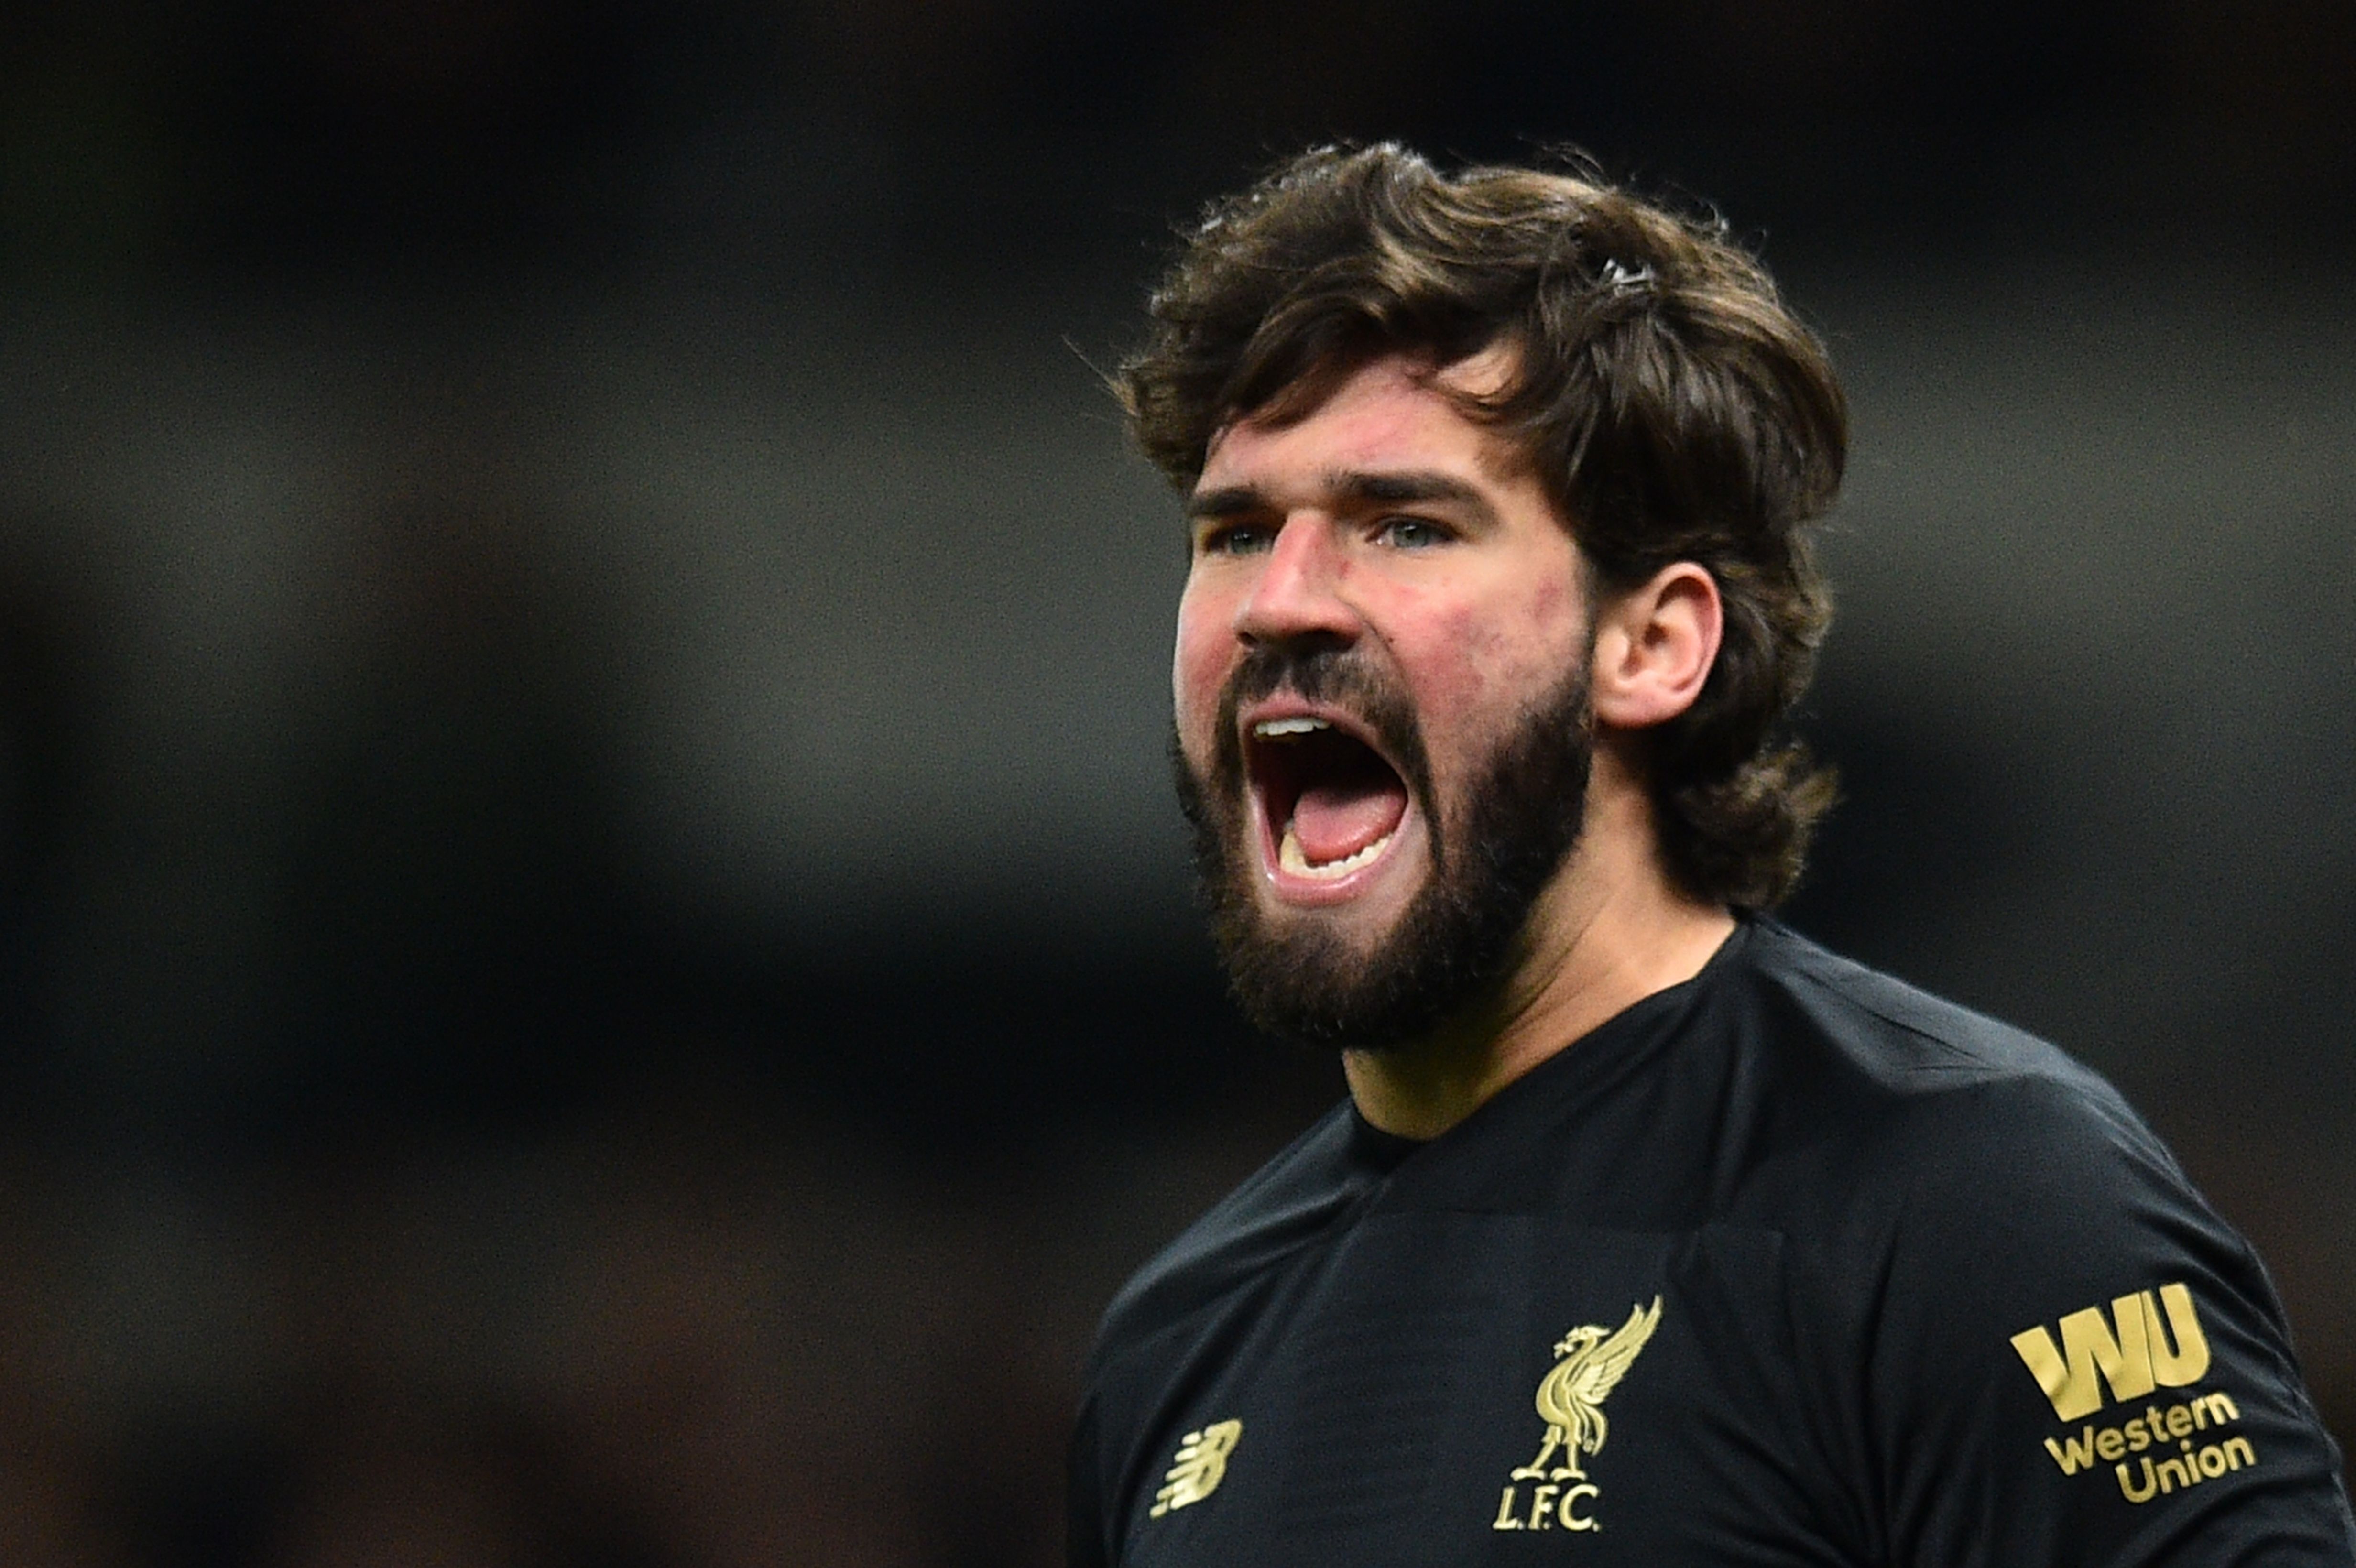 Liverpool will need Alisson at his commanding best against Chelsea. (Photo by Glyn Kirk/AFP via Getty Images)